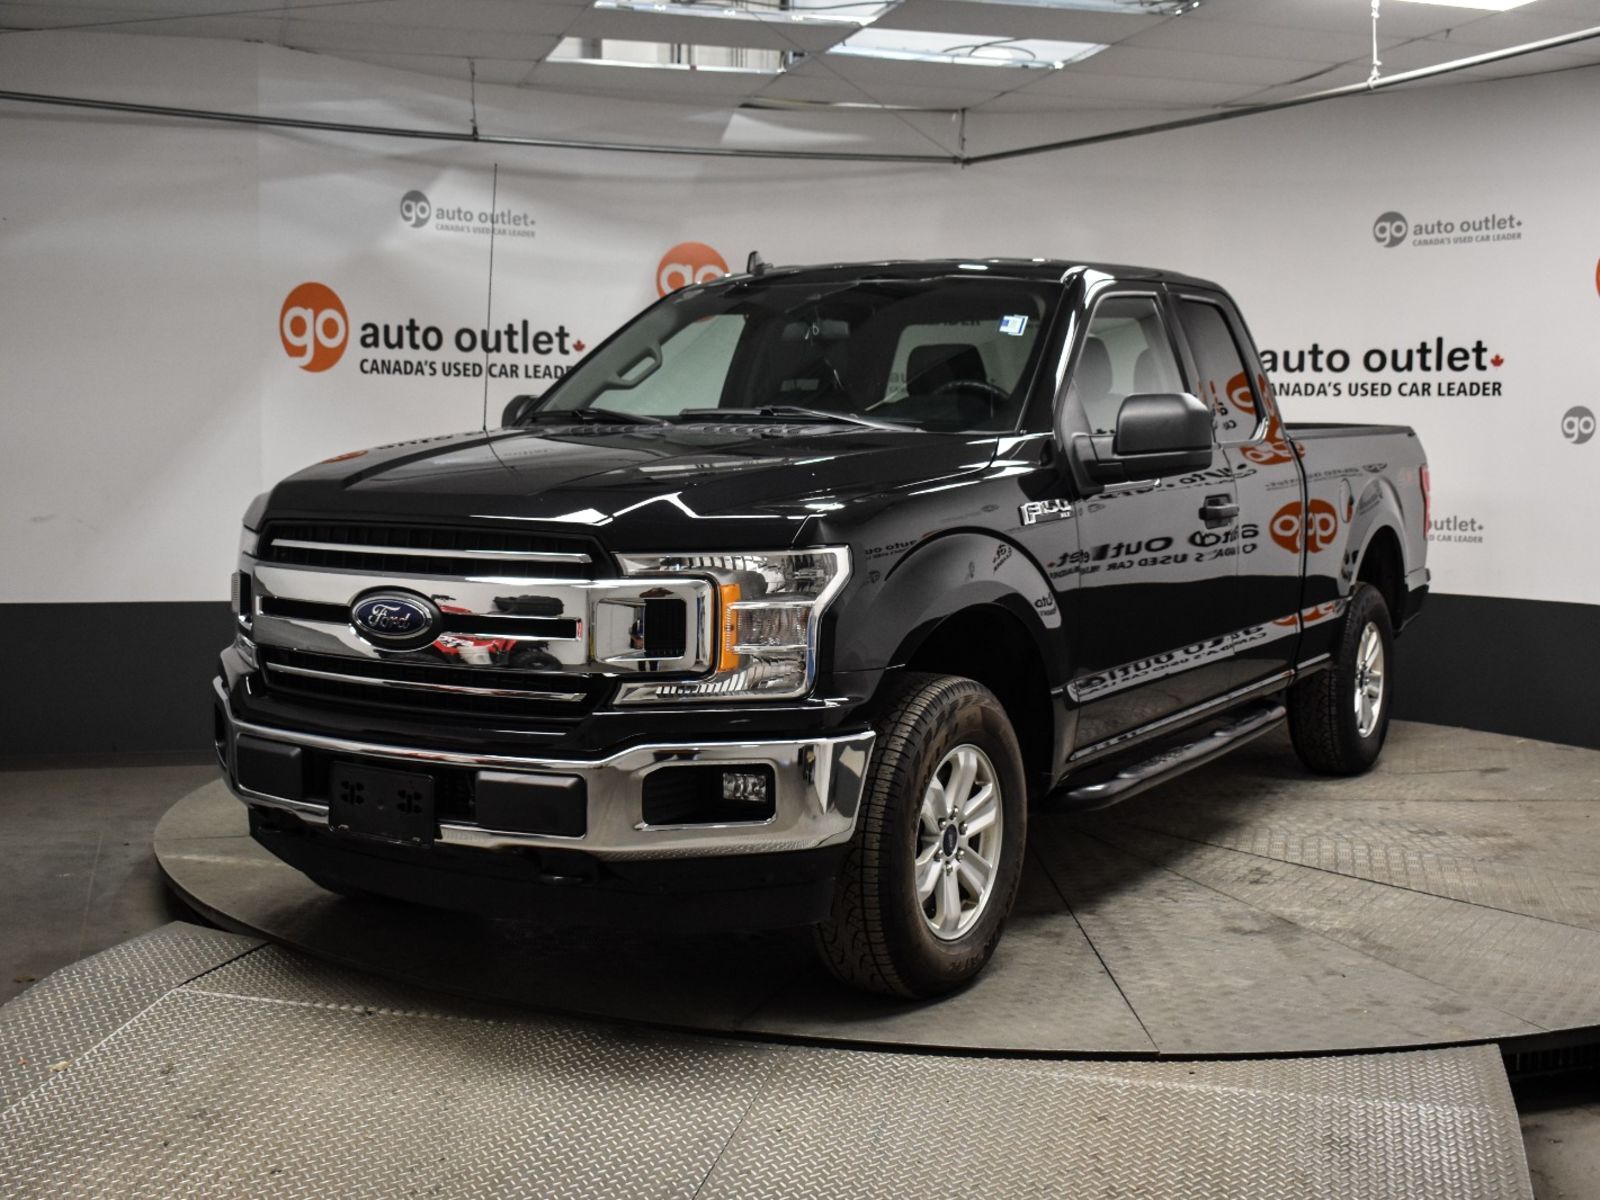 2020 Ford F-150 XLT 4WD Extended Cab, Cloth Seats 